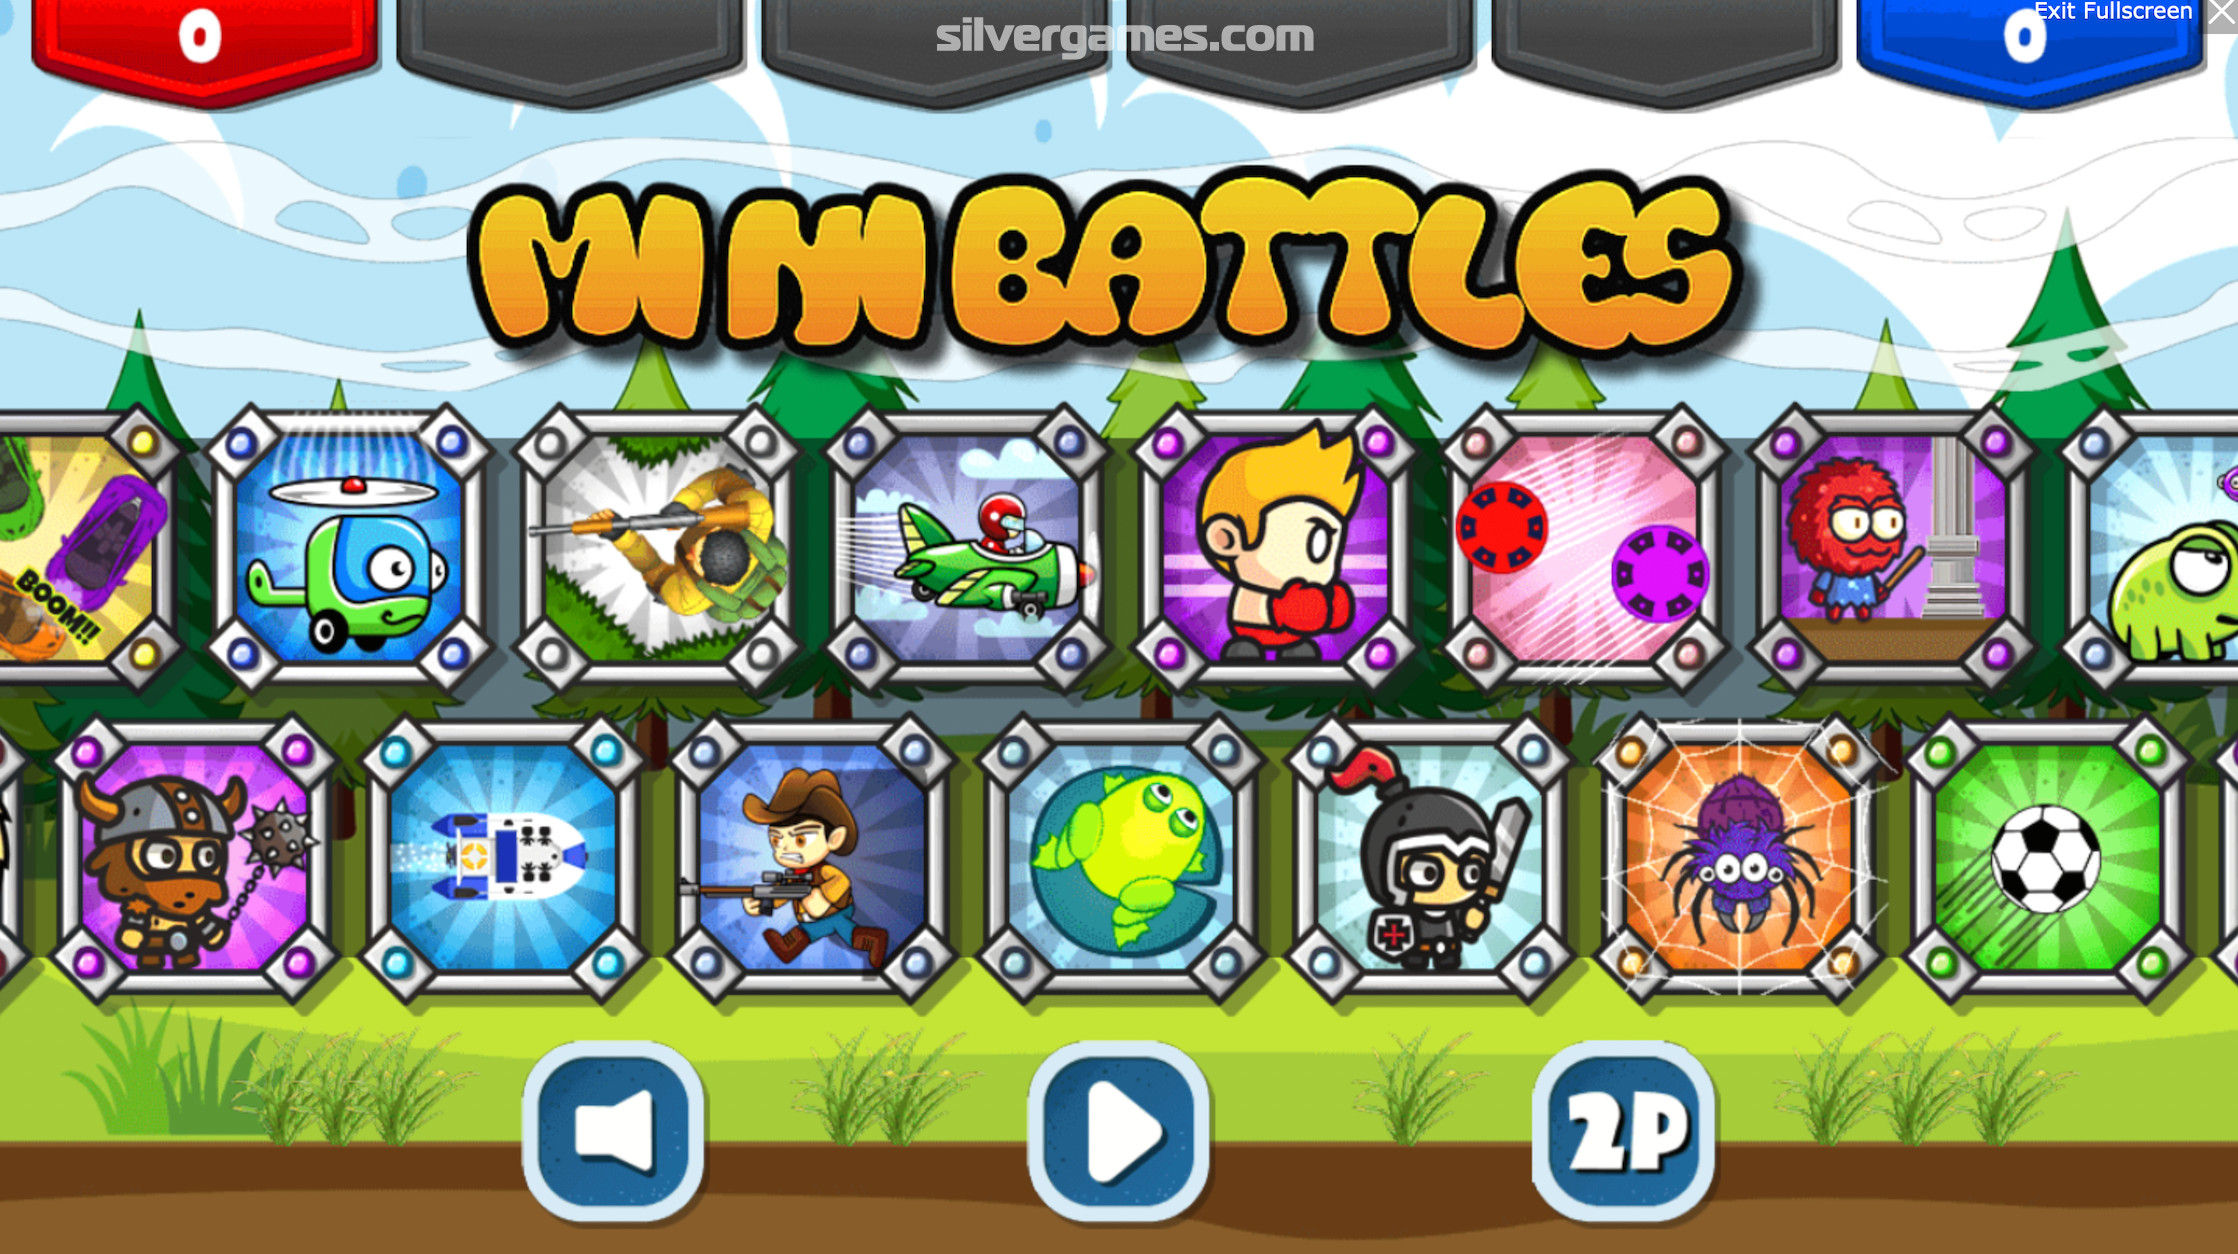 2 Player Mini Battles Game for Android - Download